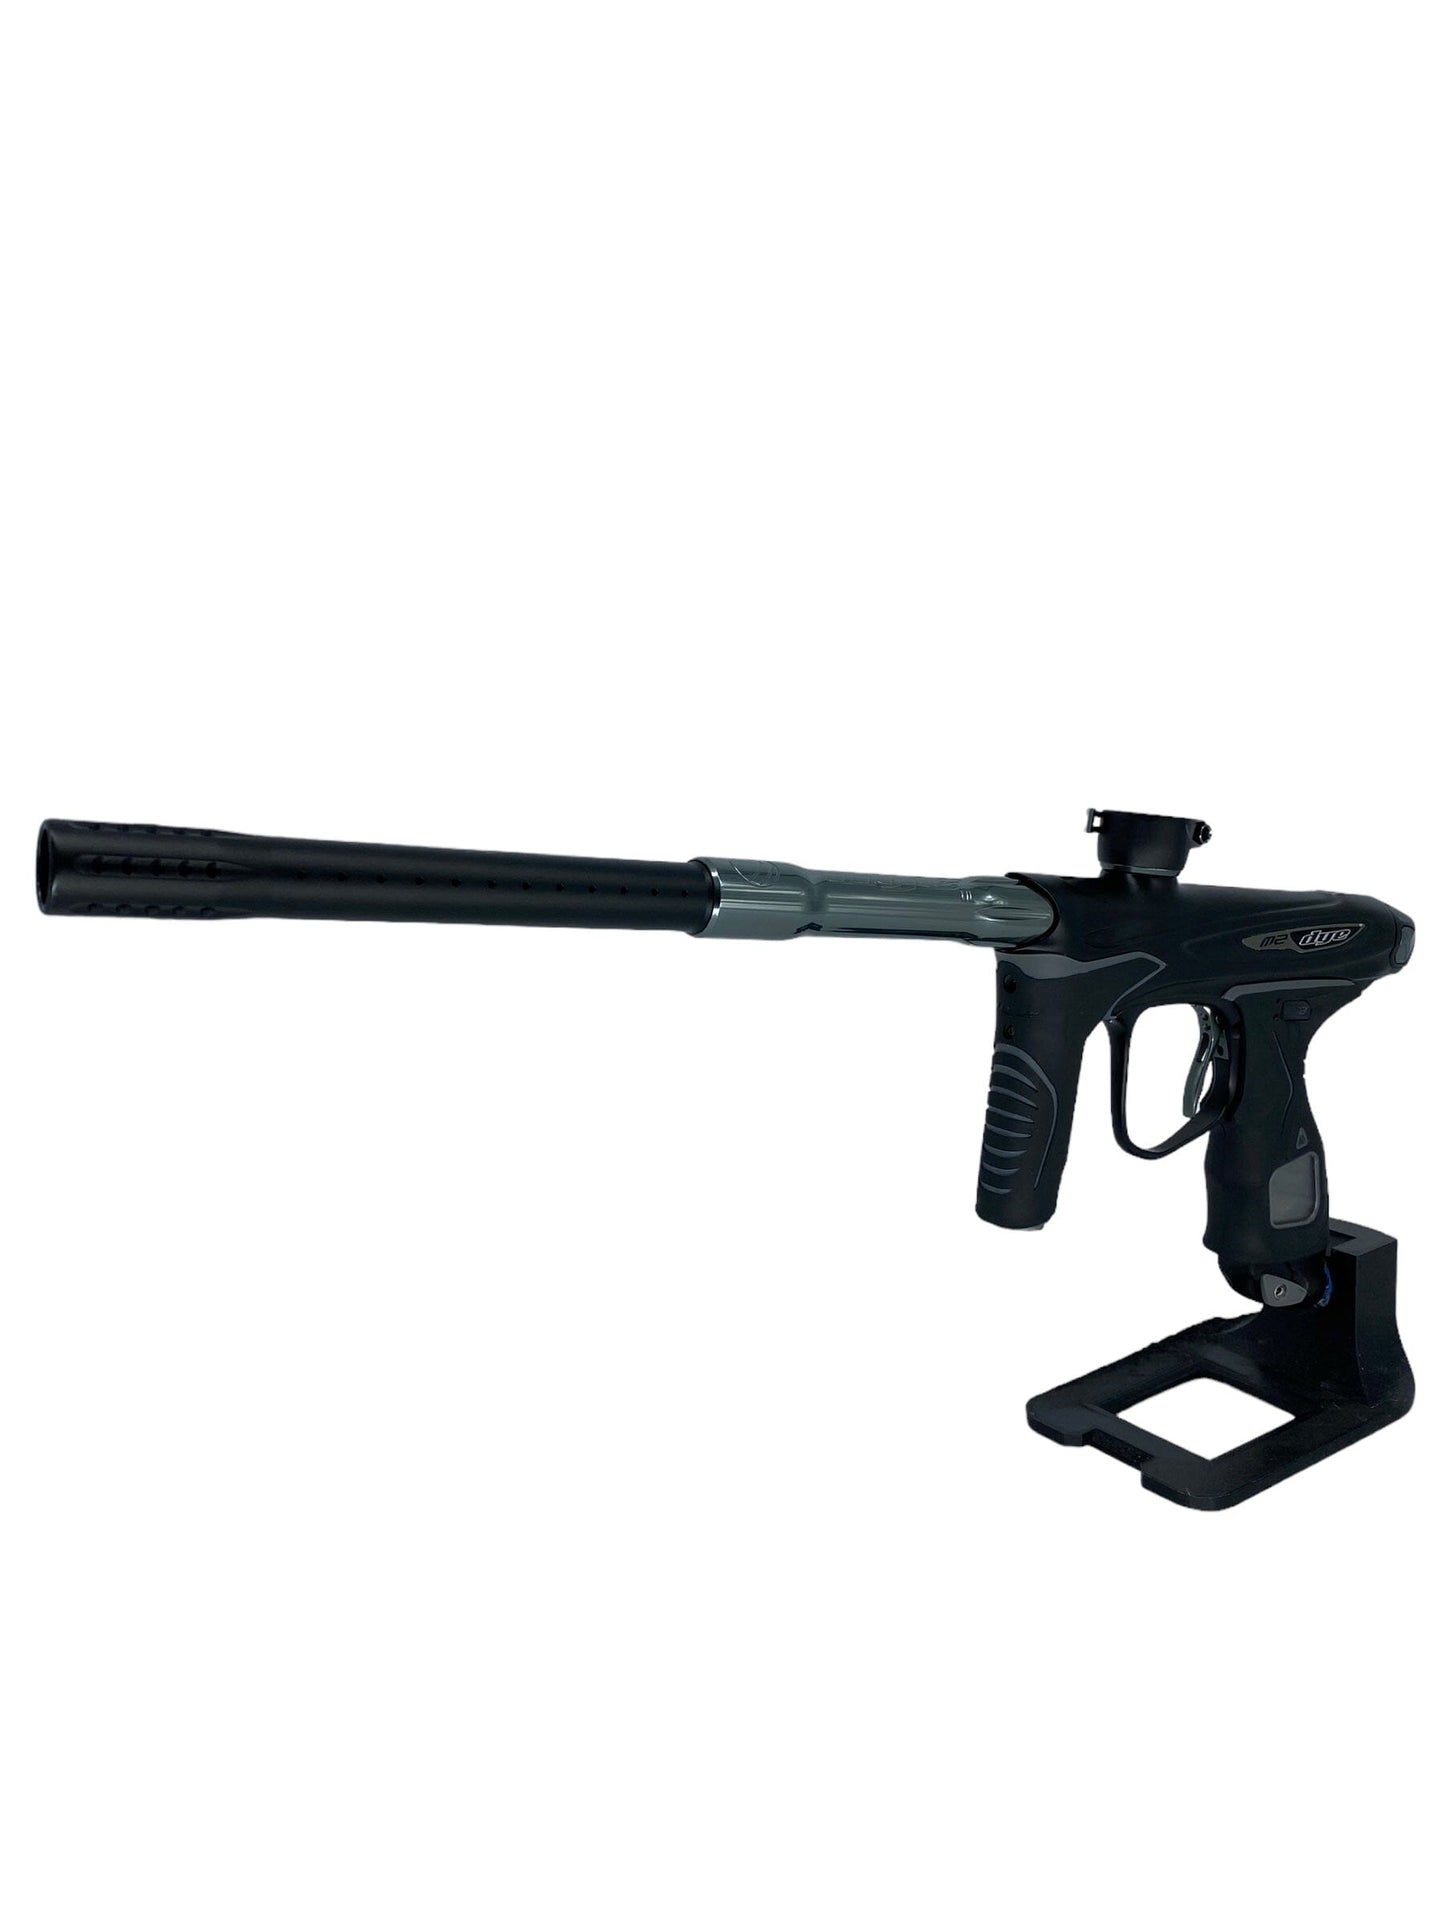 Used Dye M2 Paintball Gun Paintball Gun from CPXBrosPaintball Buy/Sell/Trade Paintball Markers, New Paintball Guns, Paintball Hoppers, Paintball Masks, and Hormesis Headbands